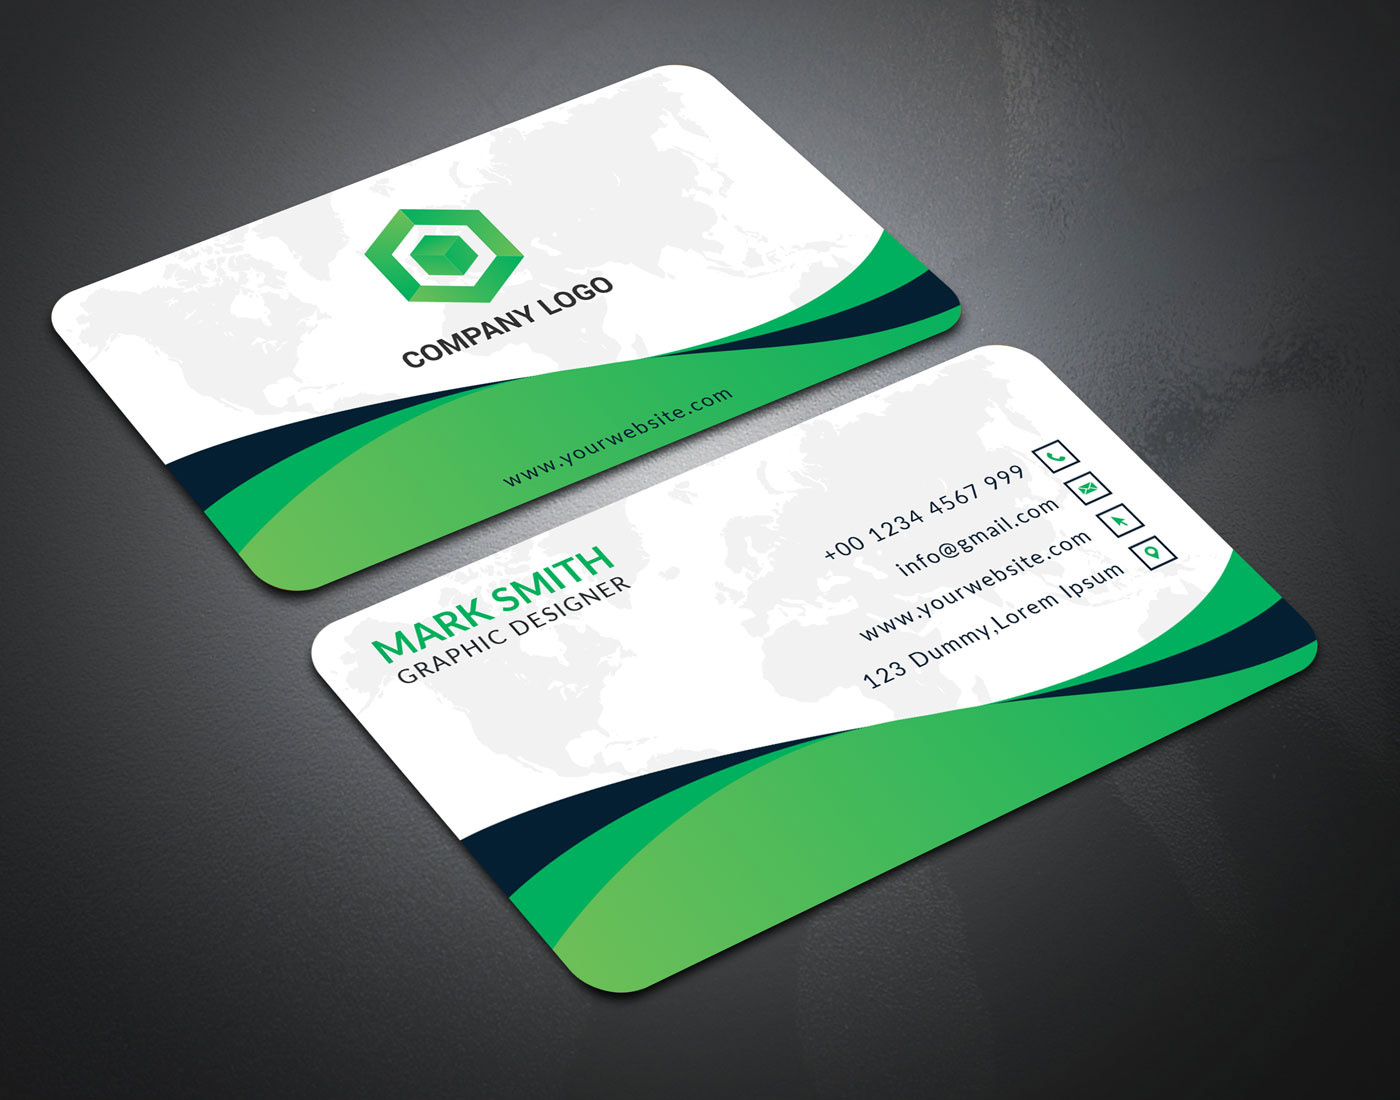 adobe photoshop business card template free download